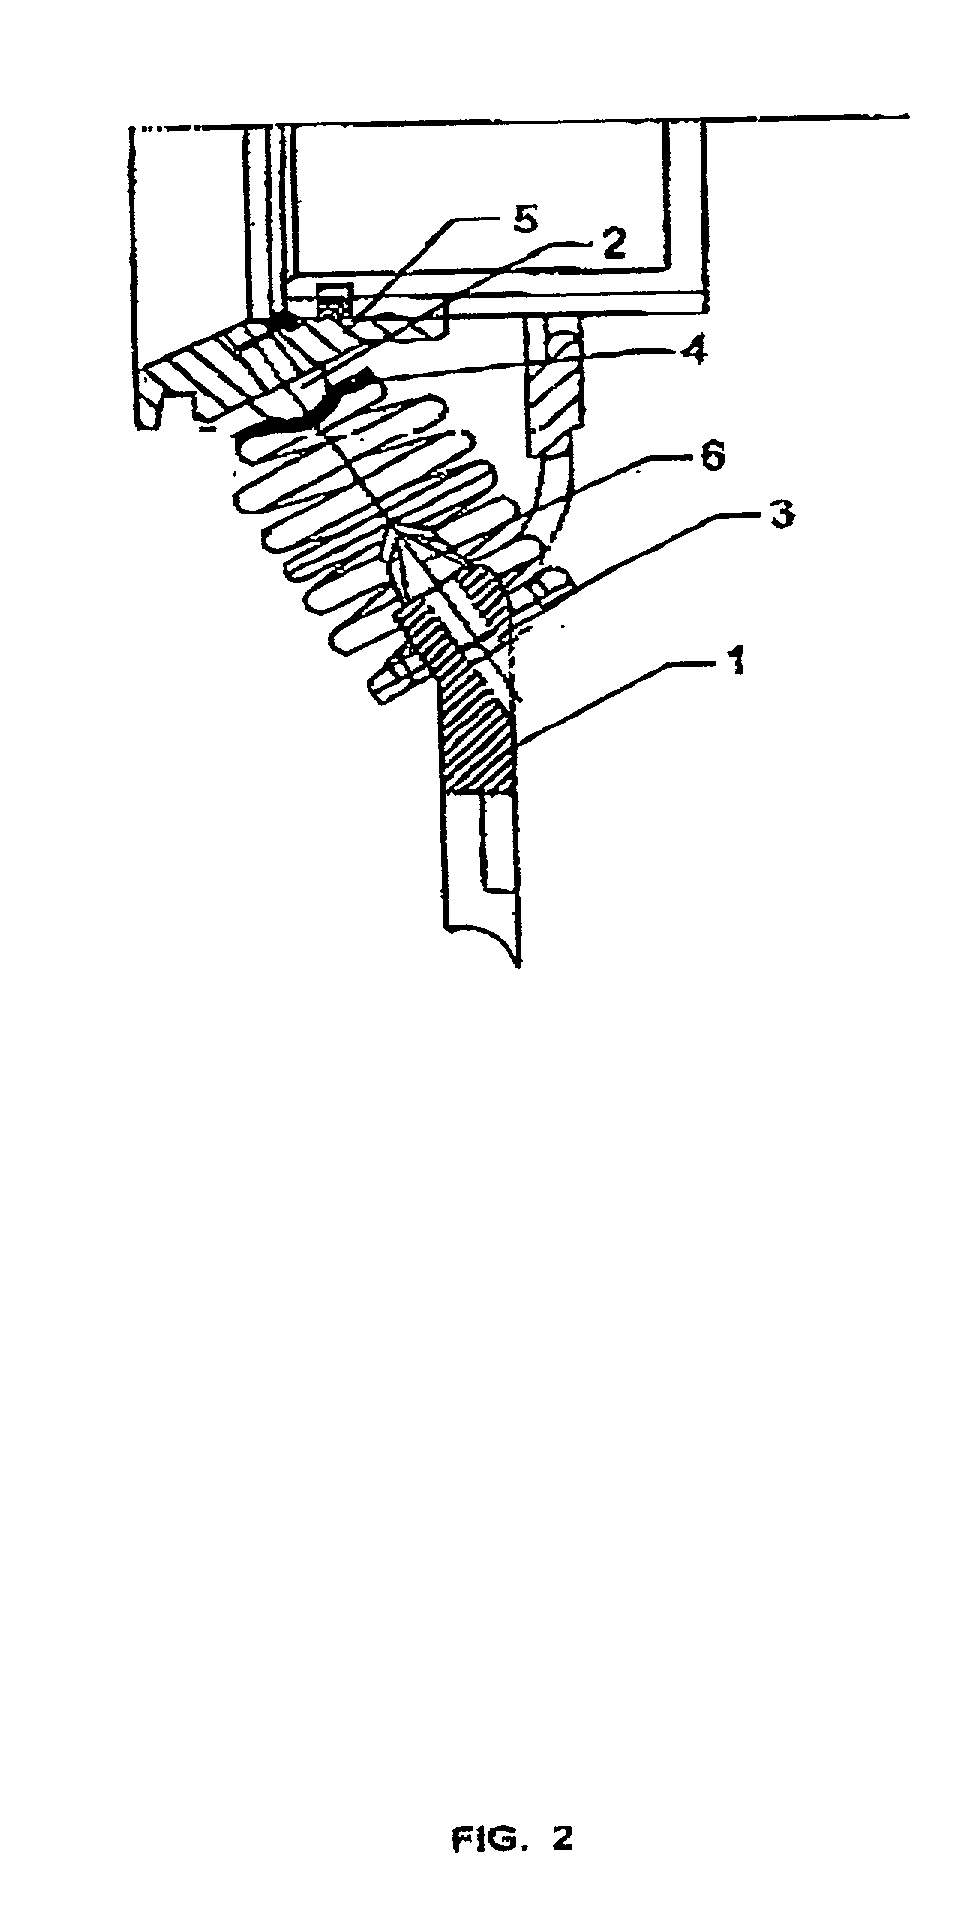 Pivot point release load adjuster assembly for use in a pull type angle spring clutch pressure plate assembly